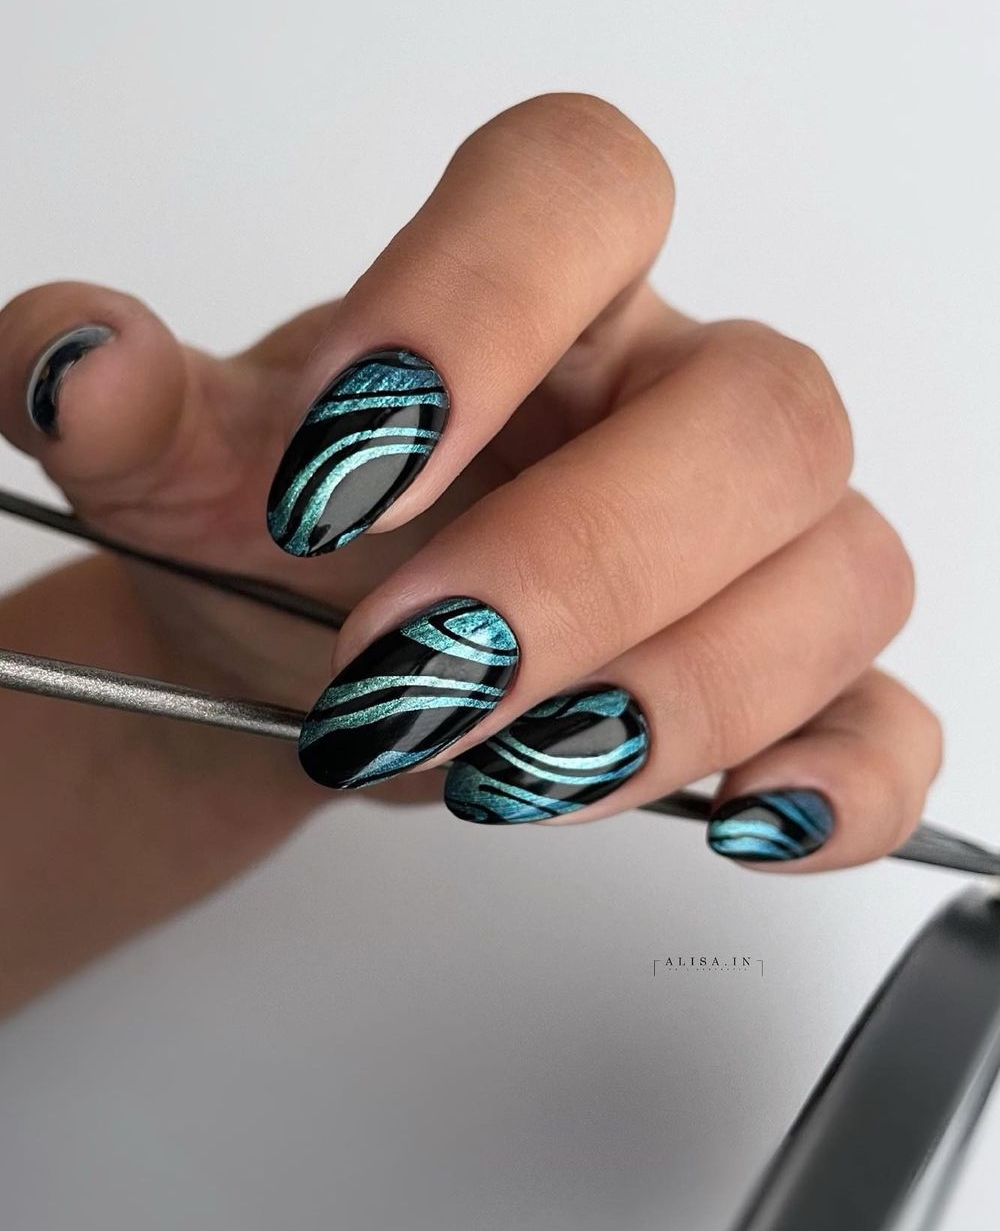 Round Black Nails with Blue Line Design